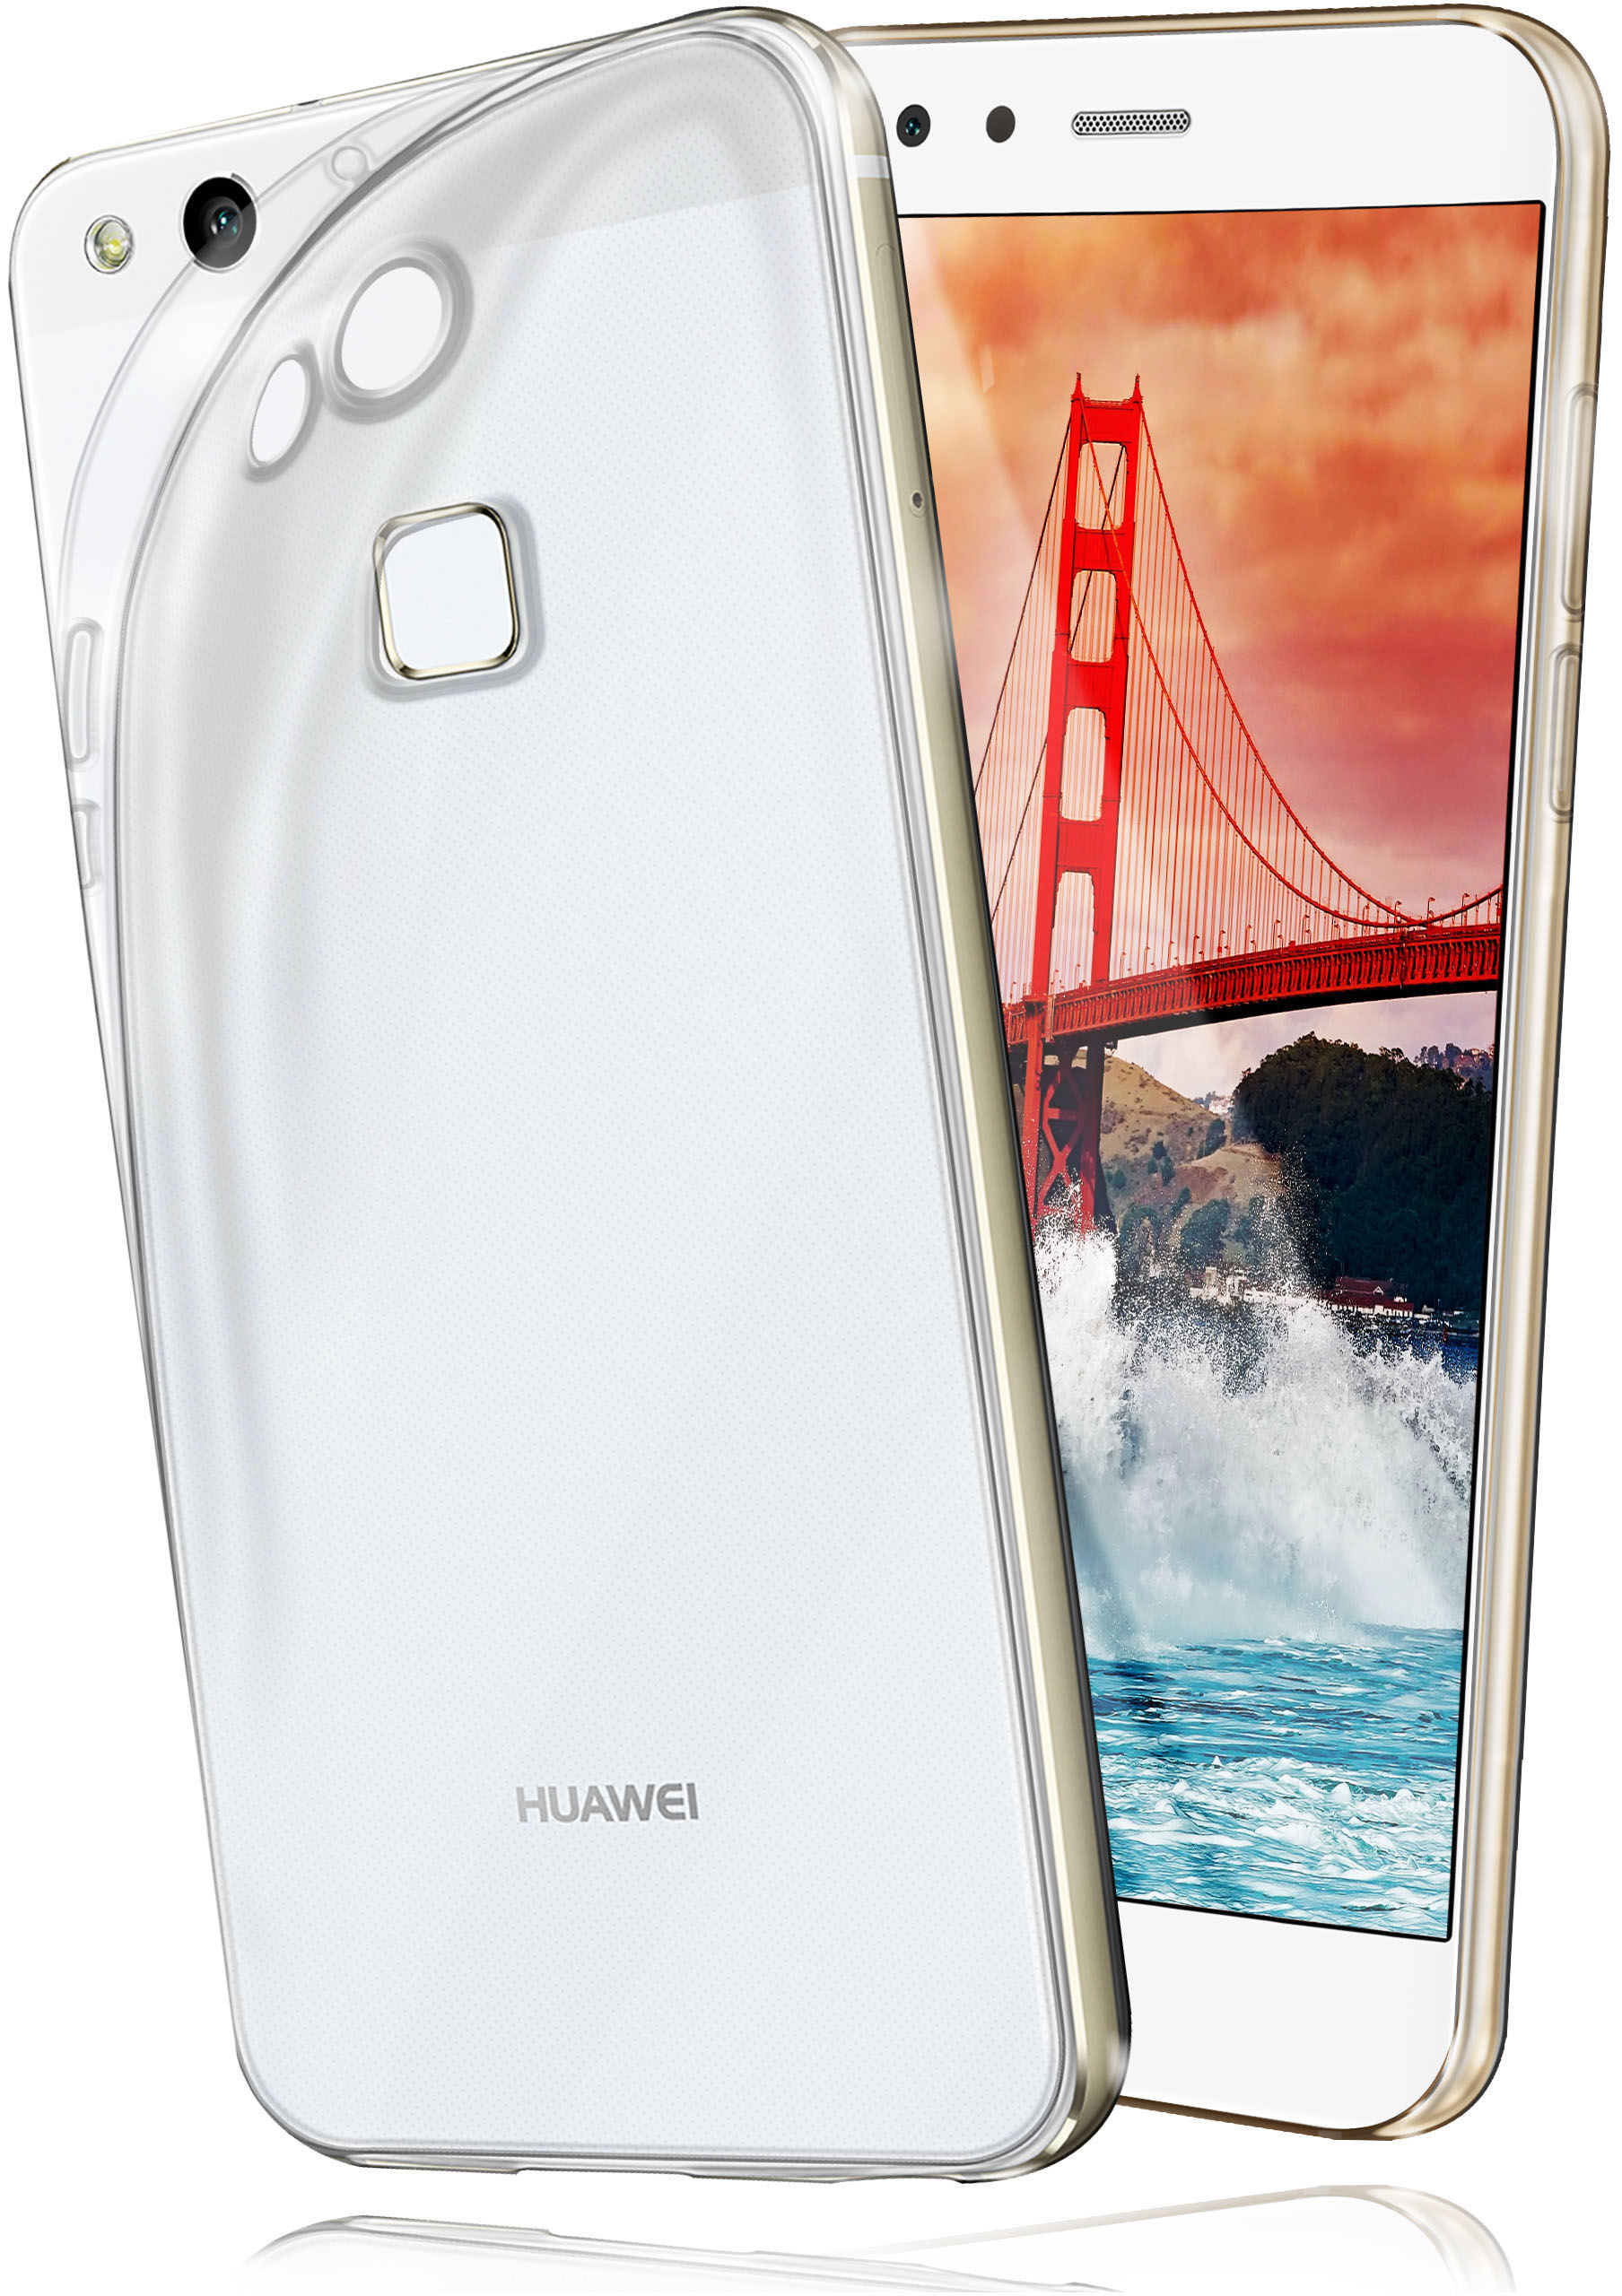 Backcover, MOEX Huawei, Lite, Crystal-Clear Case, Aero P10